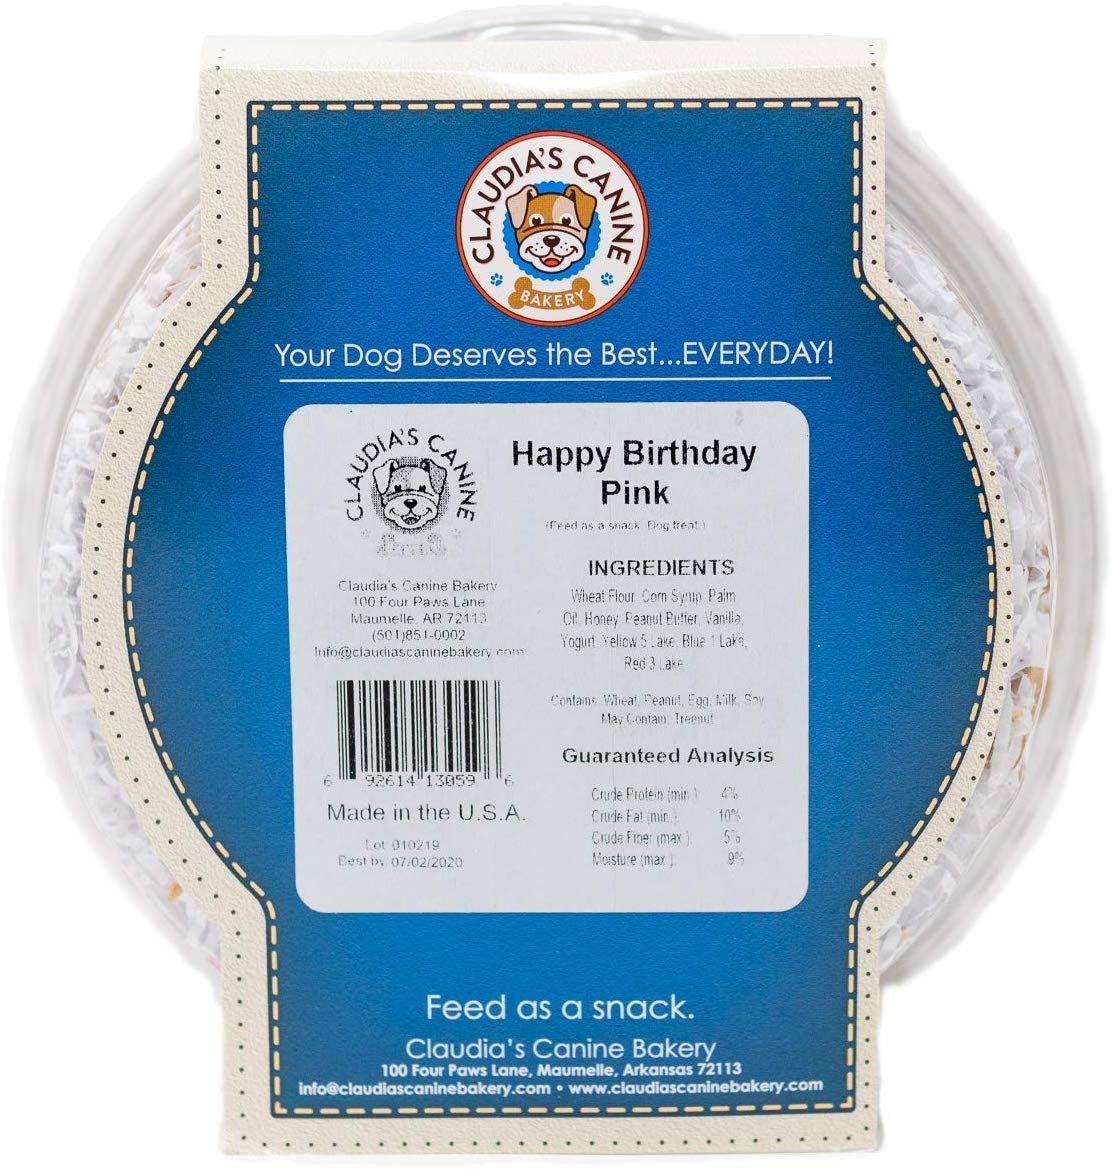 Claudia'S Canine Bakery Peanut Butter Dog Cookies, 10-Ounce, Happy Birthday, Pink